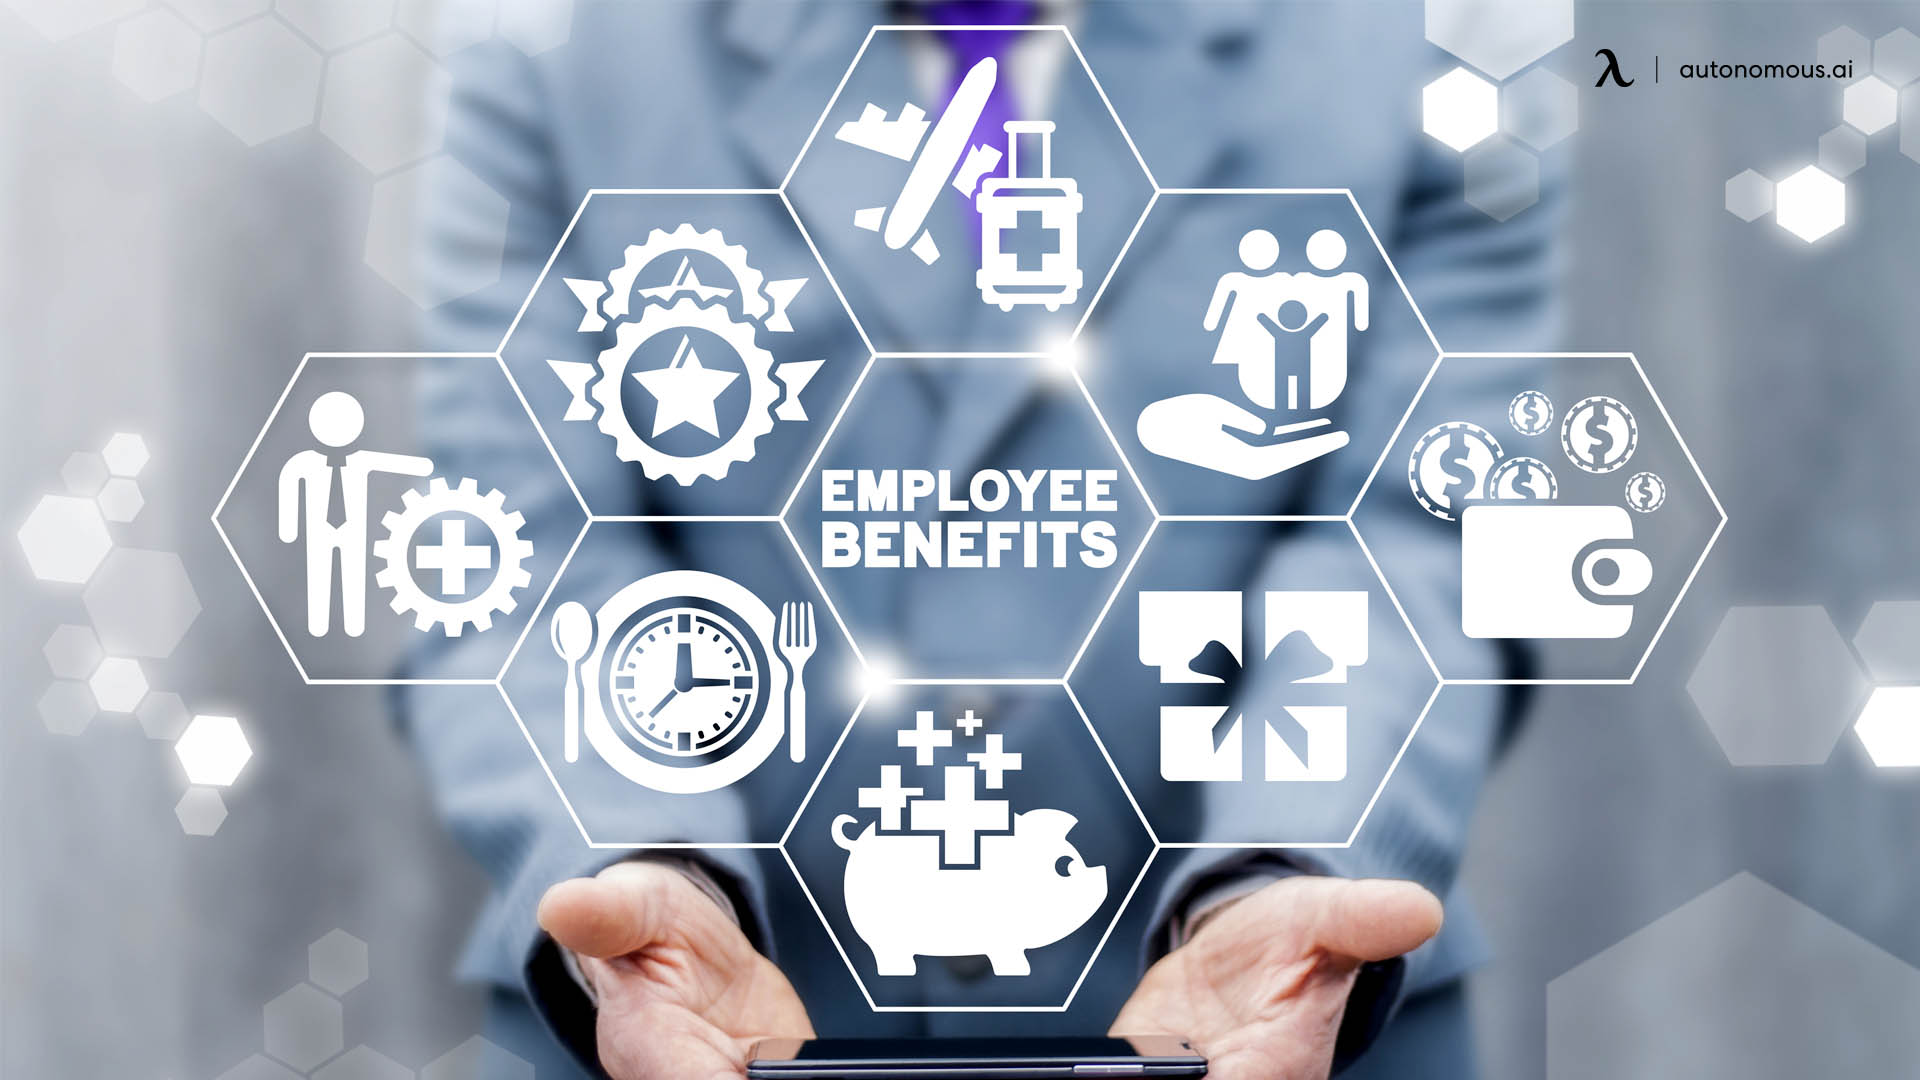 What Are Employee Benefits?